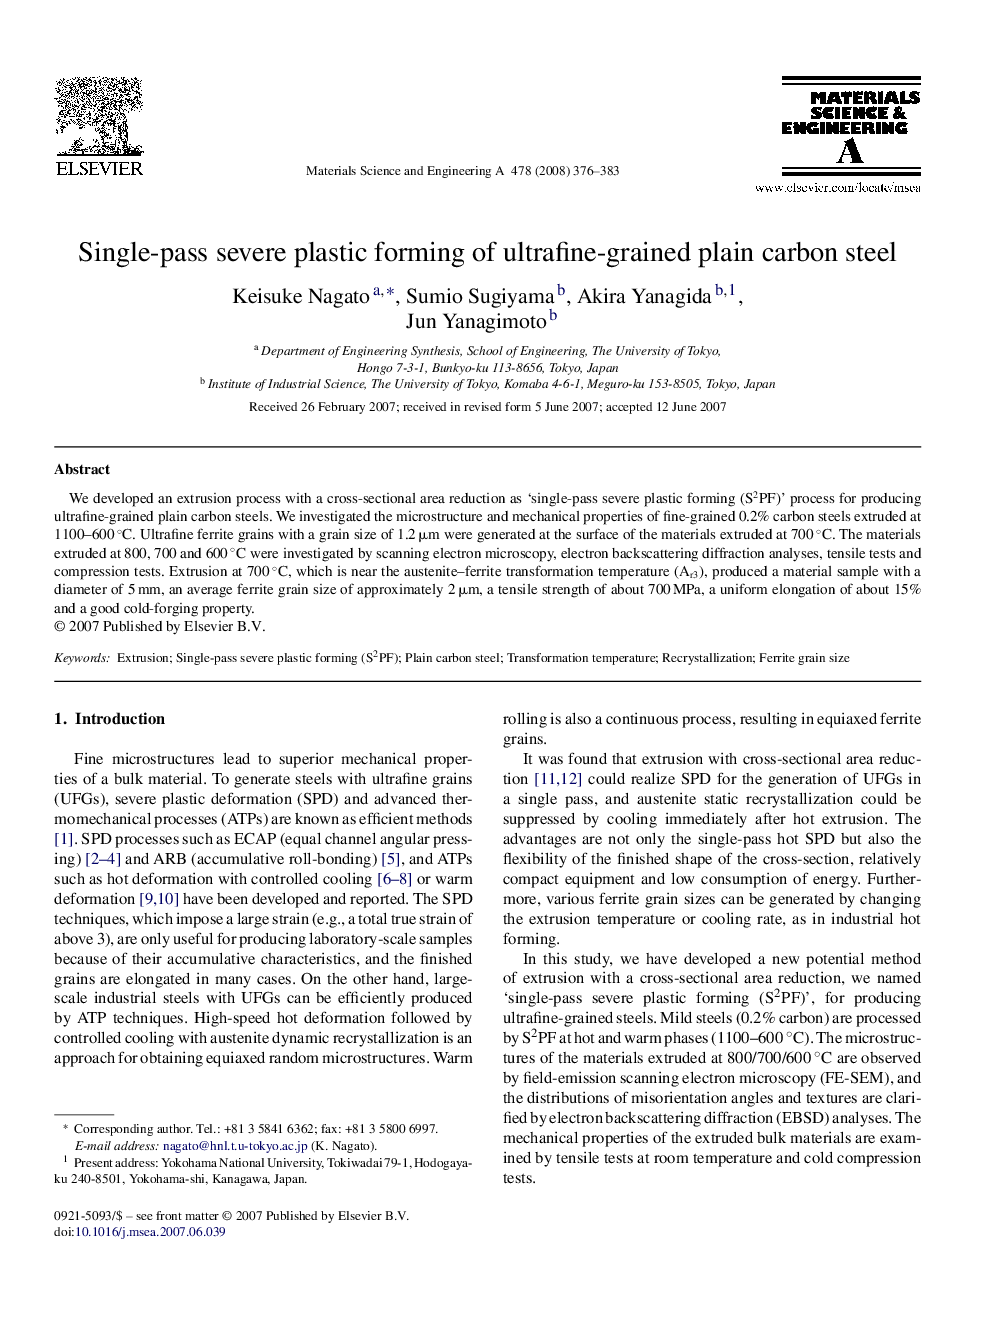 Single-pass severe plastic forming of ultrafine-grained plain carbon steel